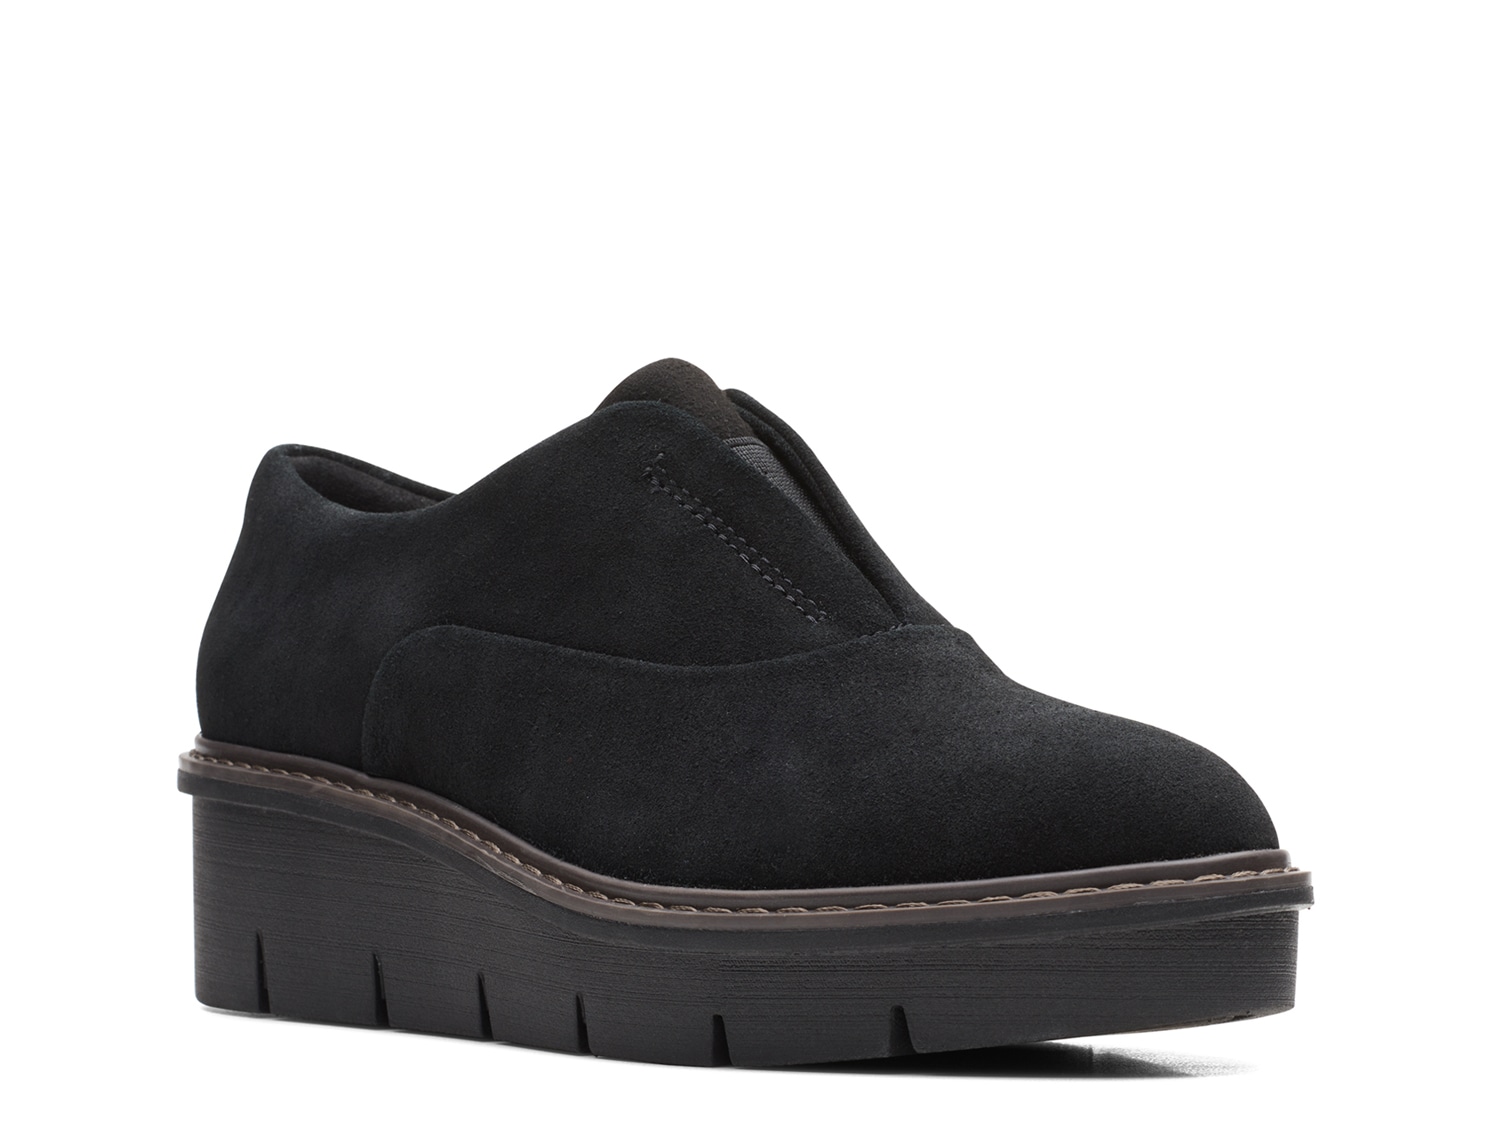 Clarks Airabell Sky Slip-On - Free Shipping | DSW